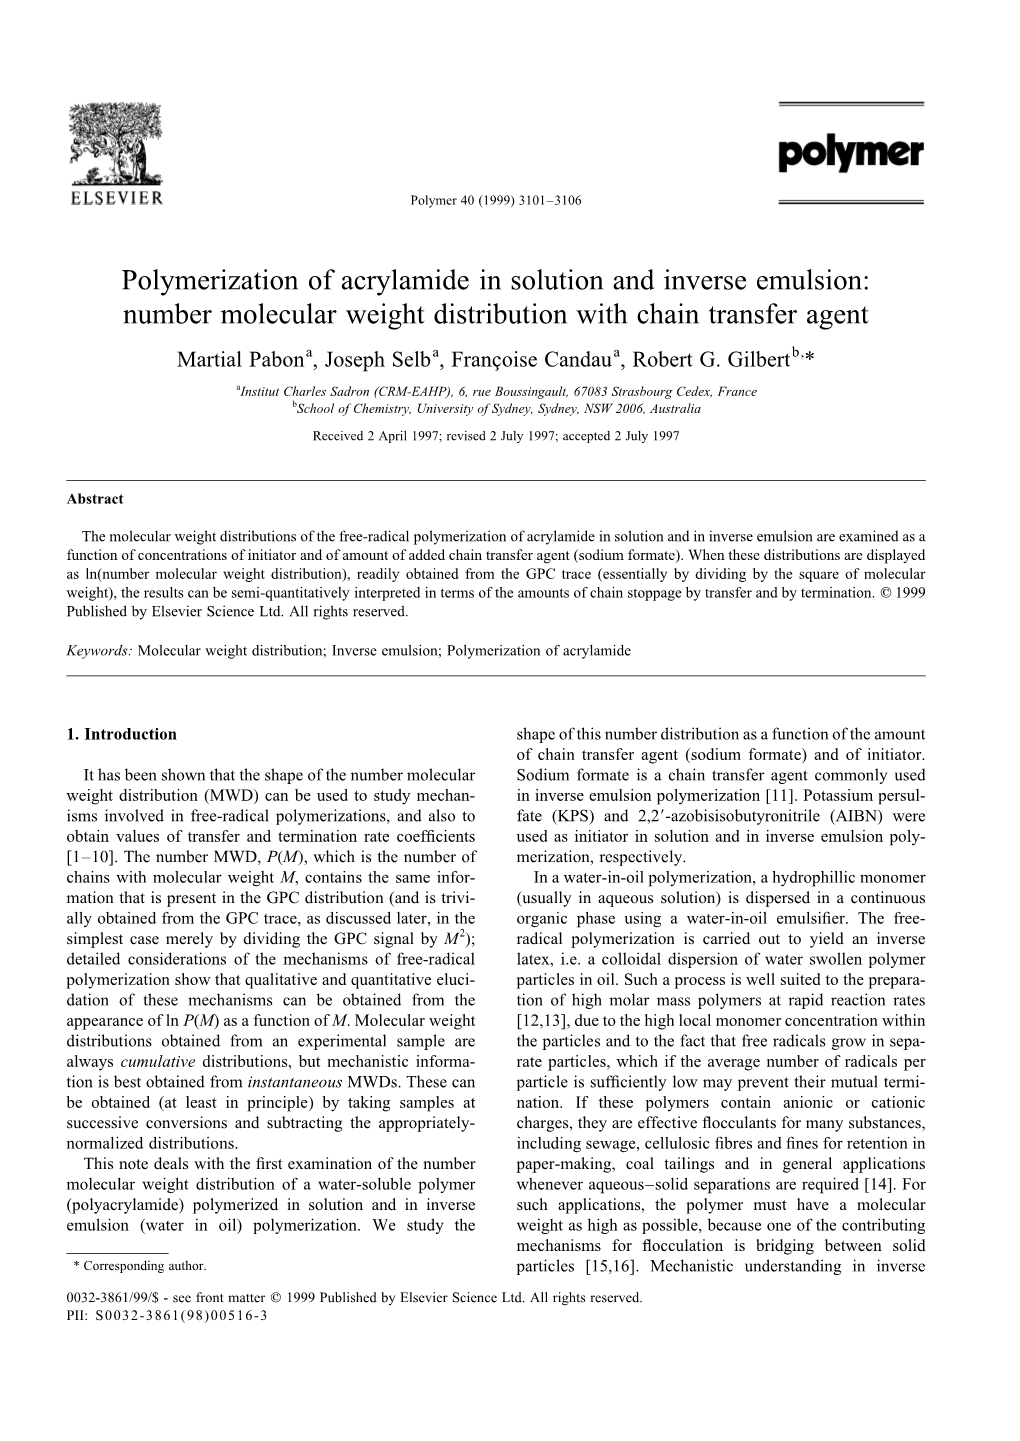 Polymerization of Acrylamide in Solution and Inverse Emulsion